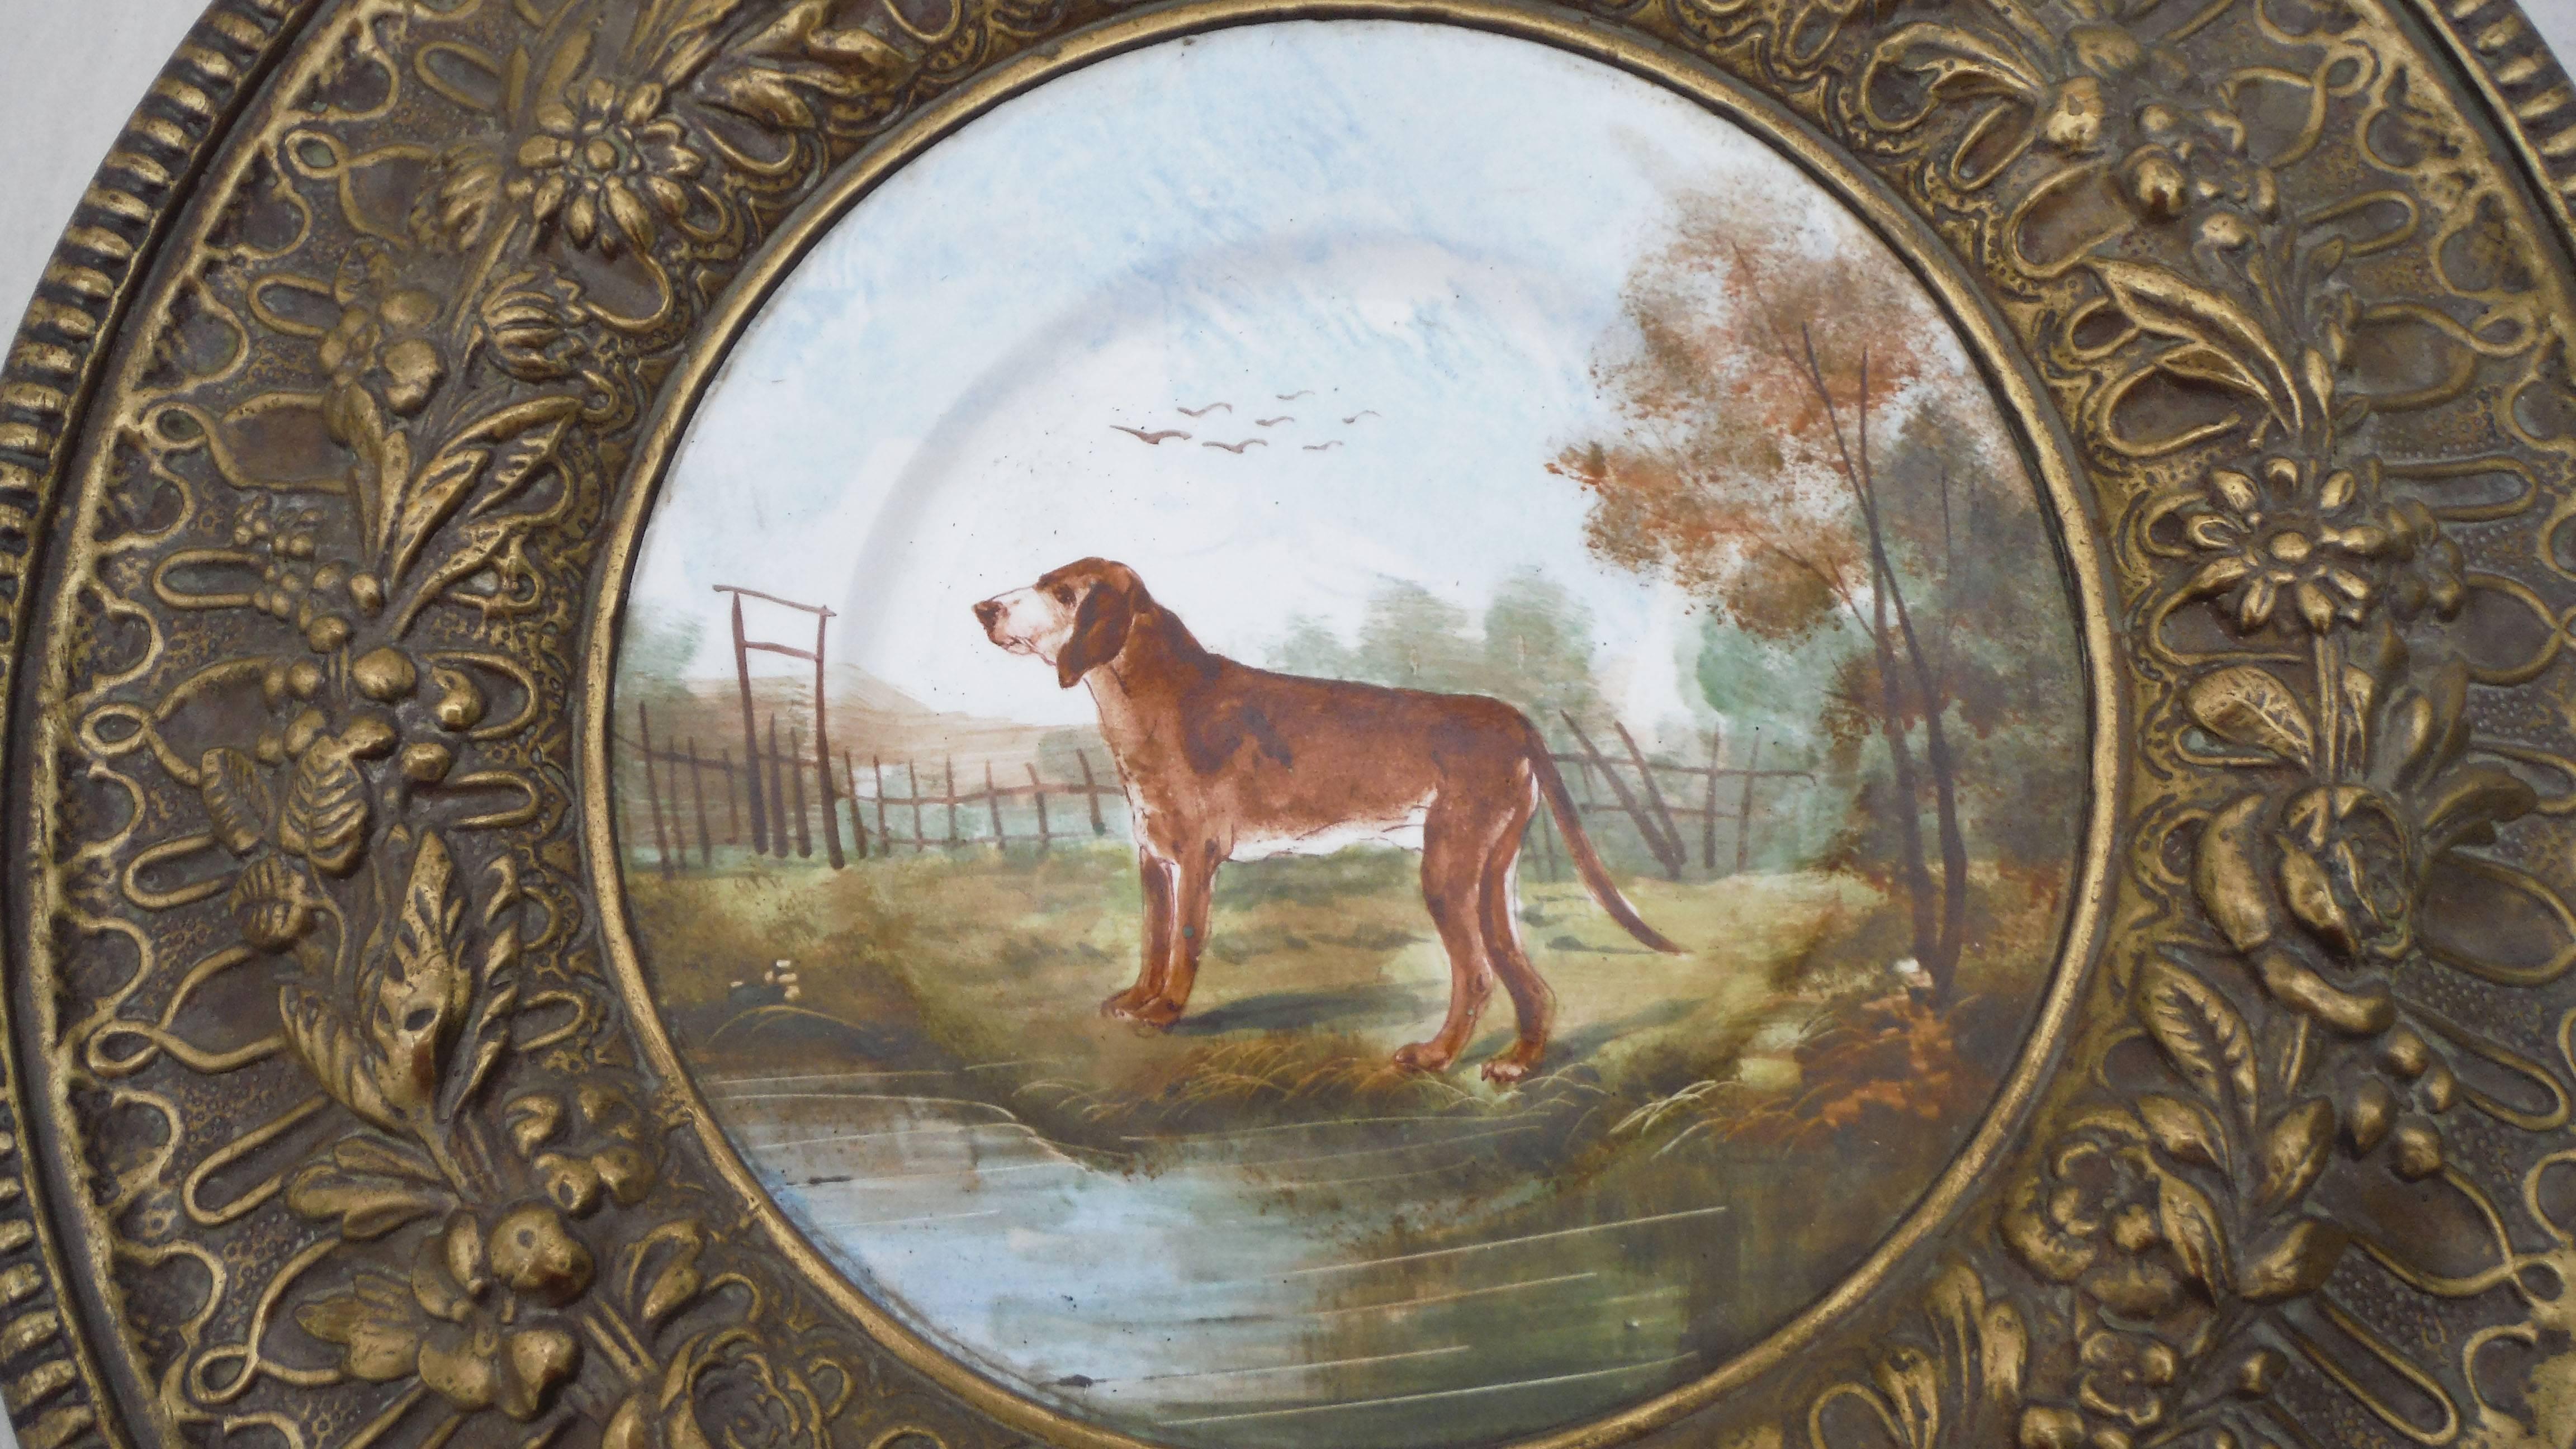 A large French faience plate framed by brass signed Choisy le Roi, circa 1880.
The faience plate represent a hunting dog in a landscape. The brass is entirely decorated with flowers and geometric pattern.